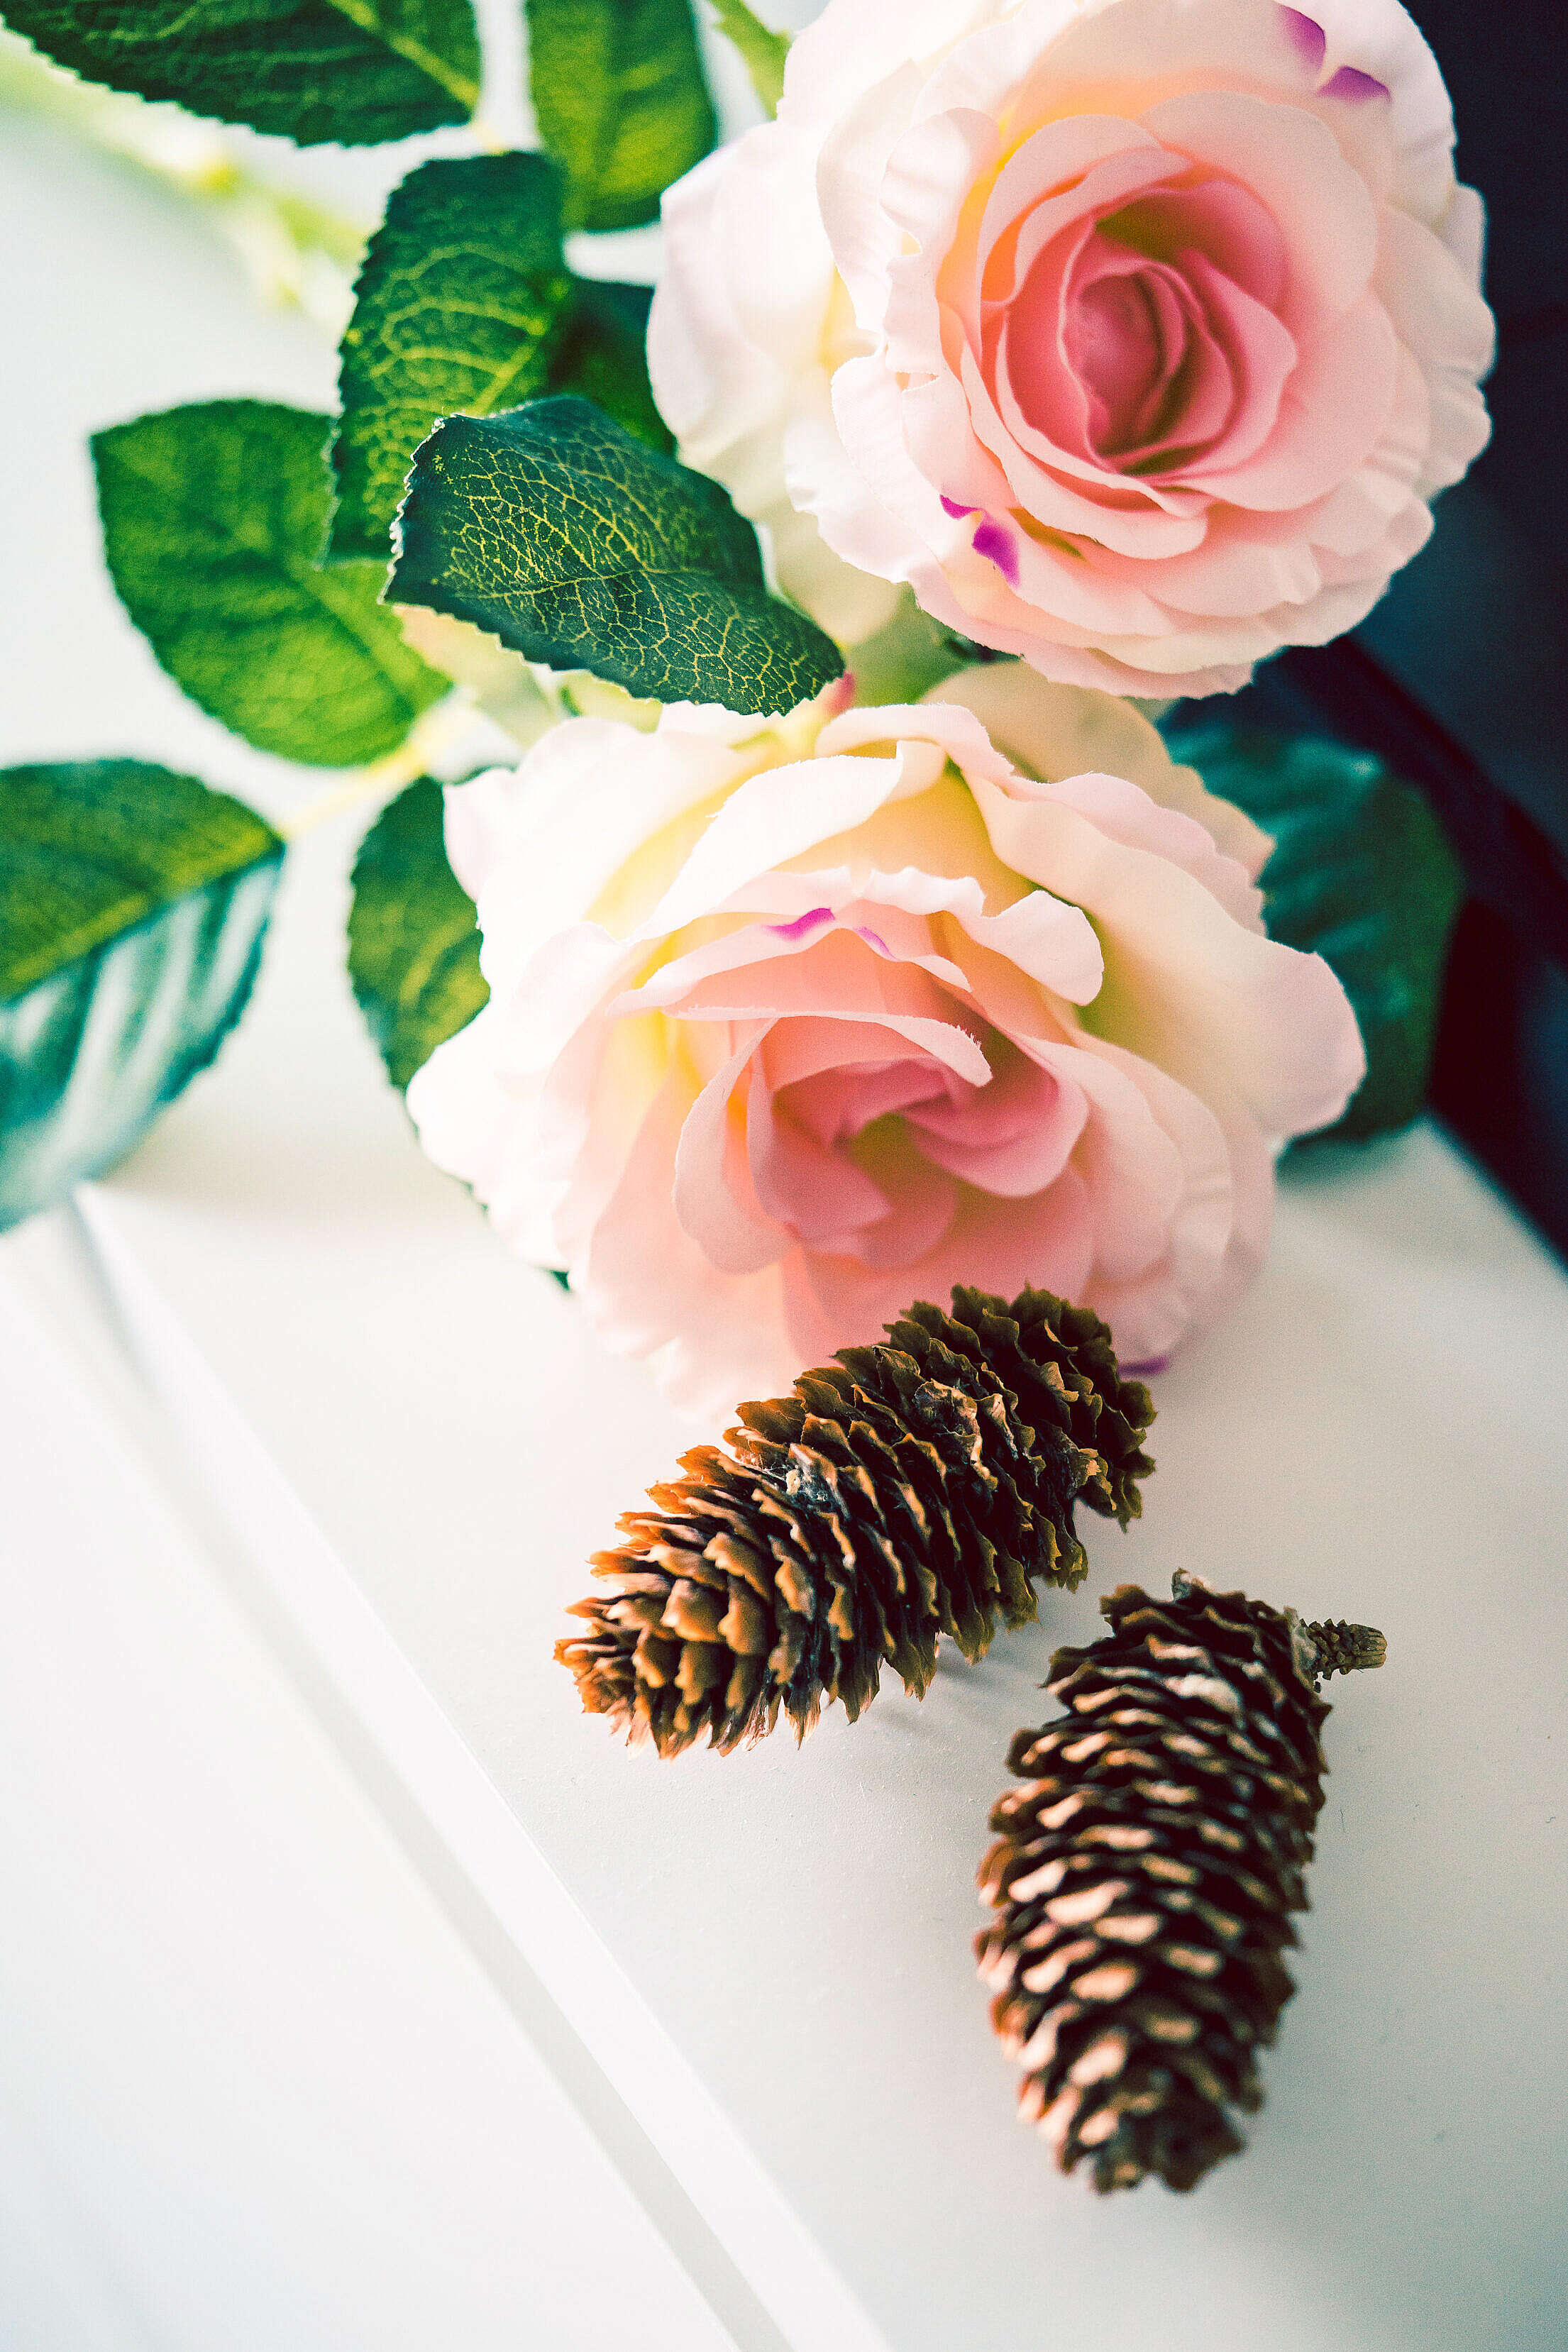 Autumn Feeling: Roses and Cones Free Stock Photo